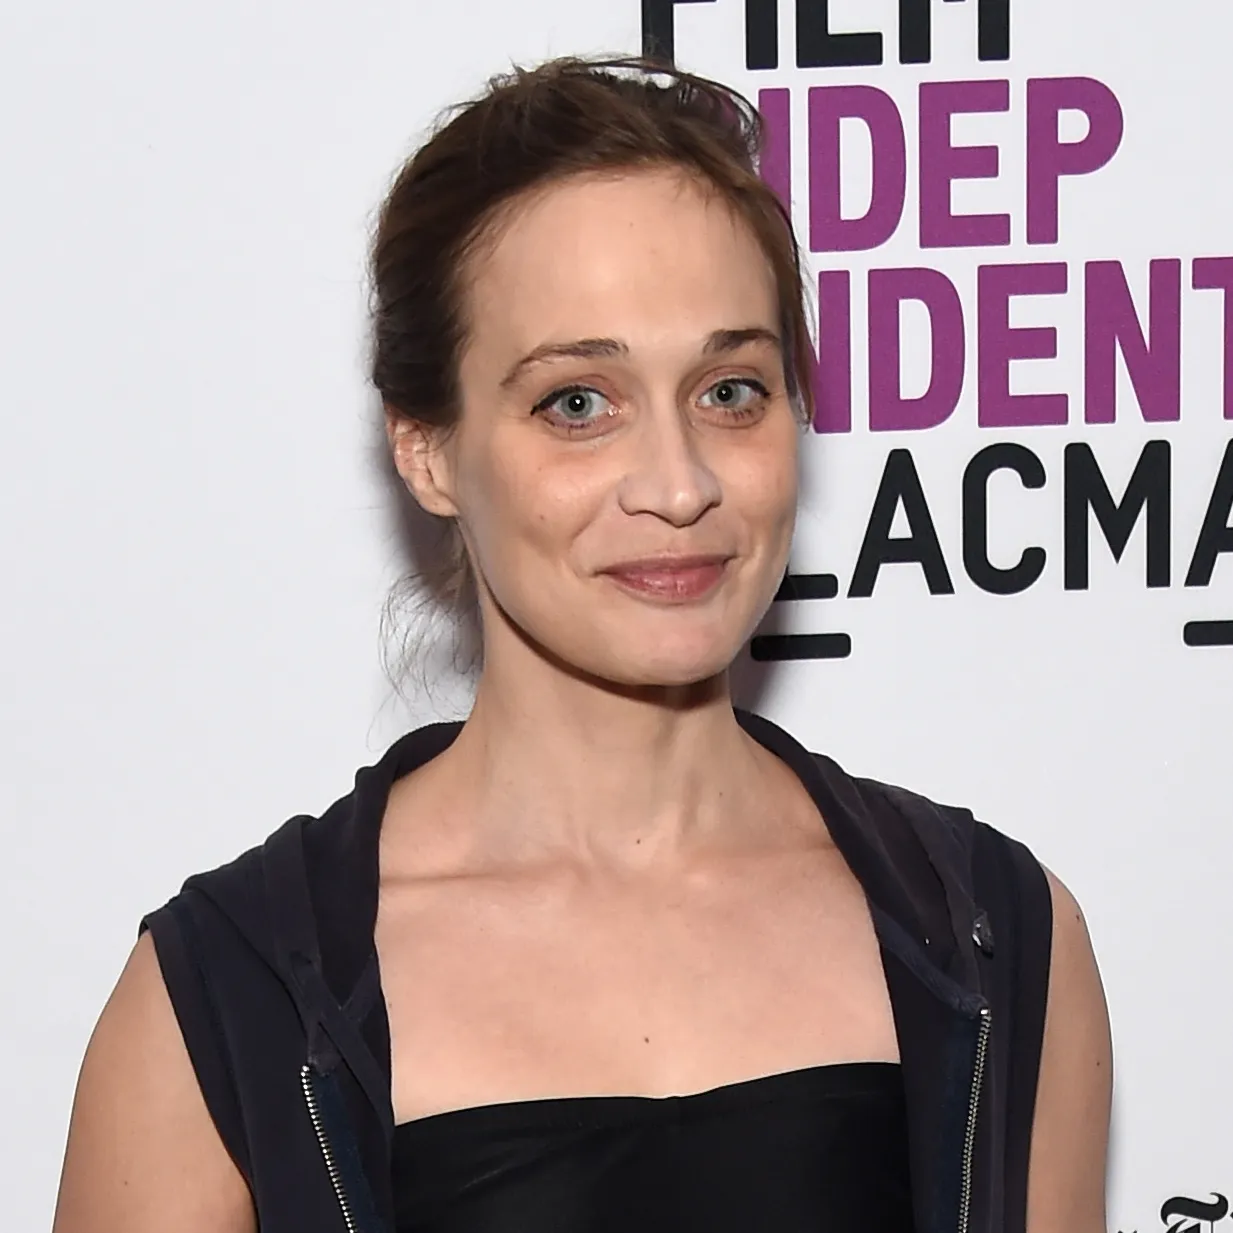 Fiona Apple 13 Untold Facts About Her Including Hubbyboyfriend 3054